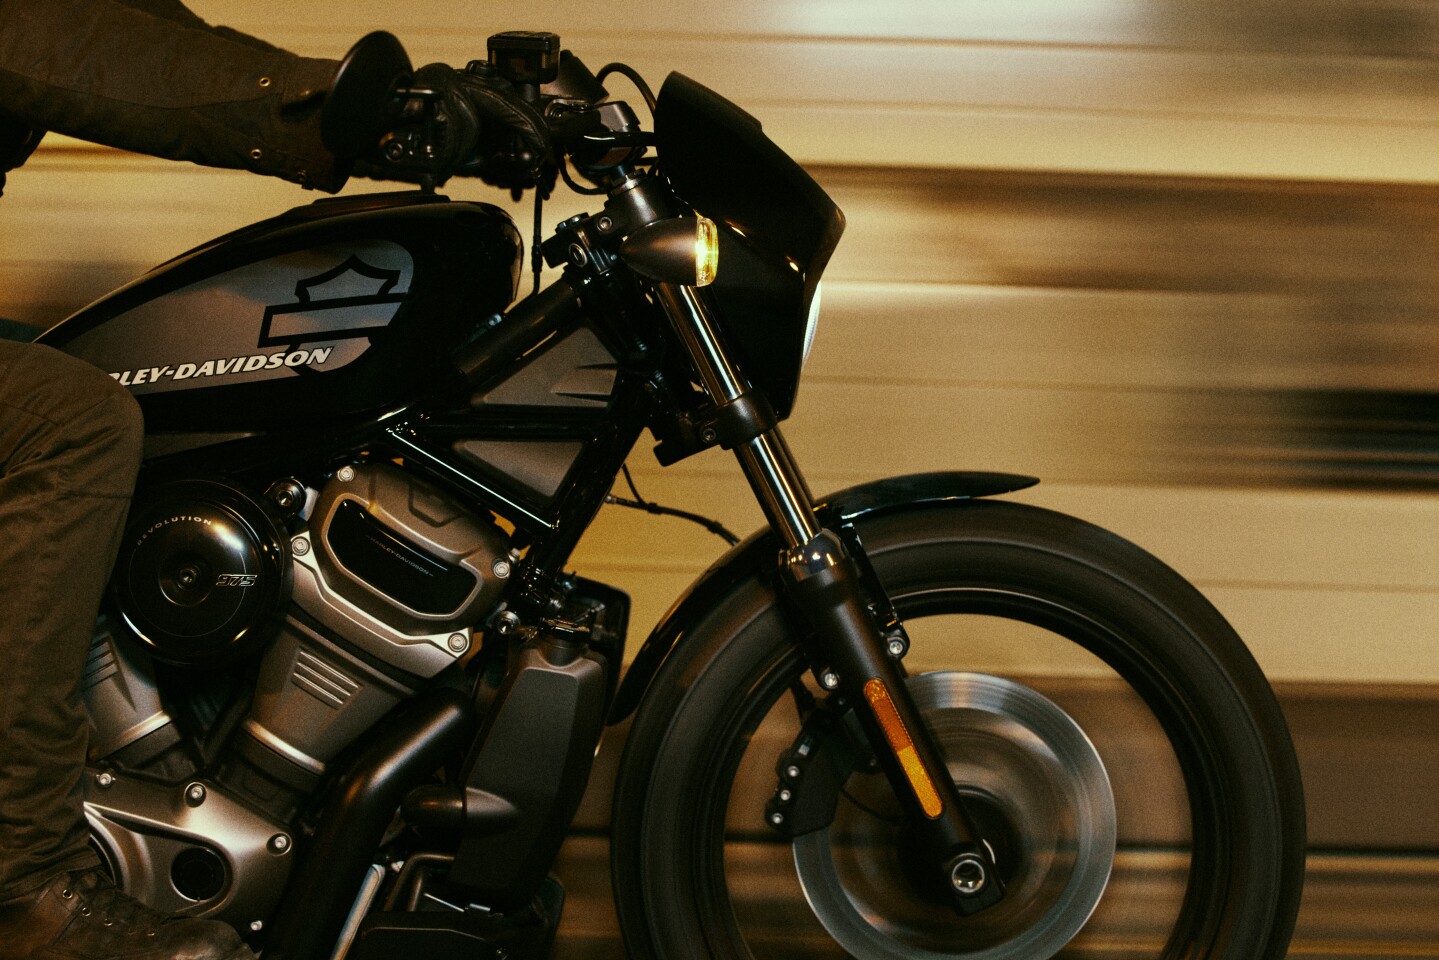 The 2022 Harley-Davidson Nightster uses conventional, non-adjustable 41-mm Showa Dual Bending Valve forks